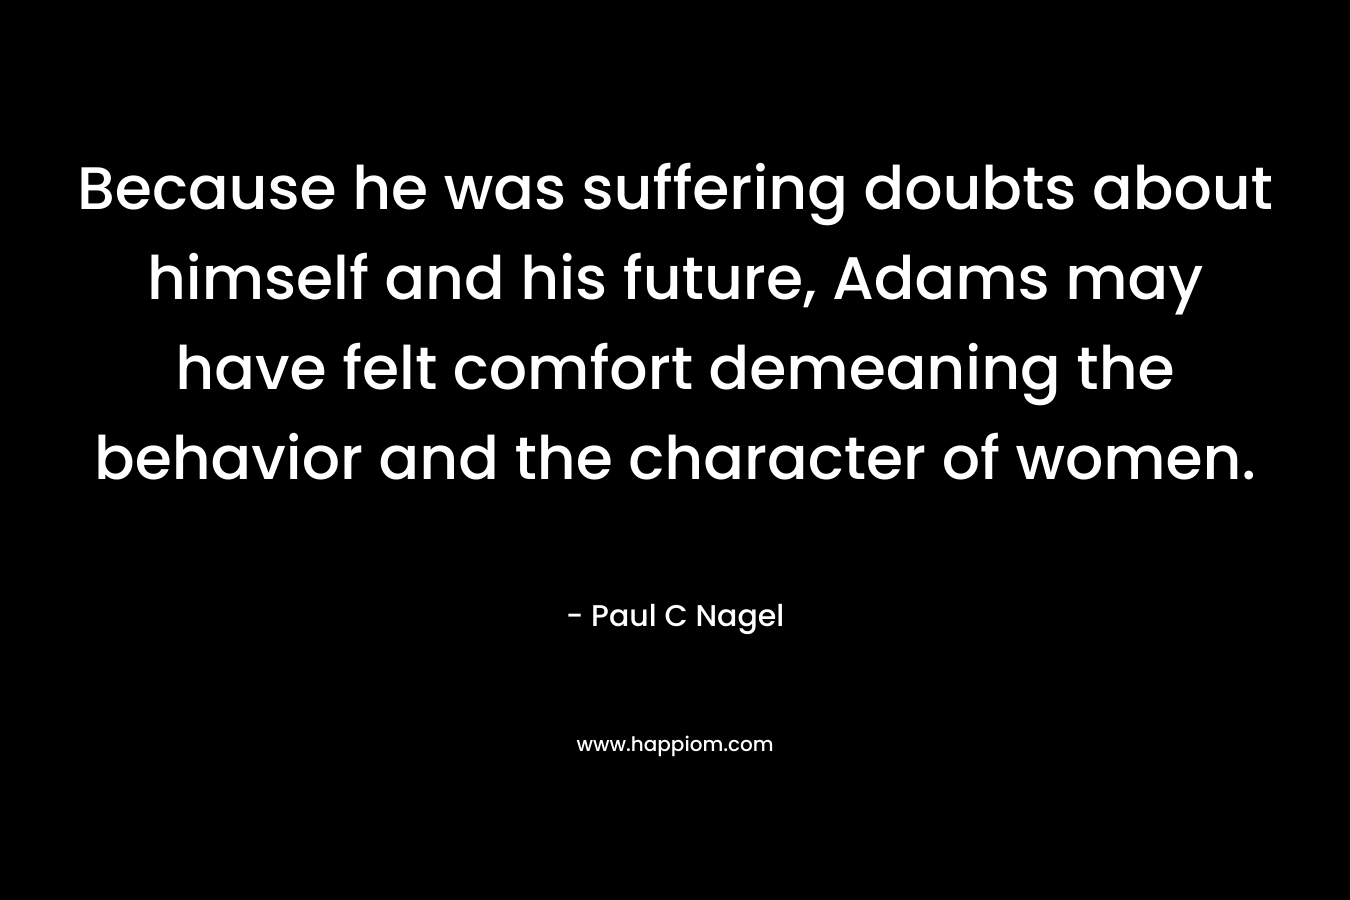 Because he was suffering doubts about himself and his future, Adams may have felt comfort demeaning the behavior and the character of women.